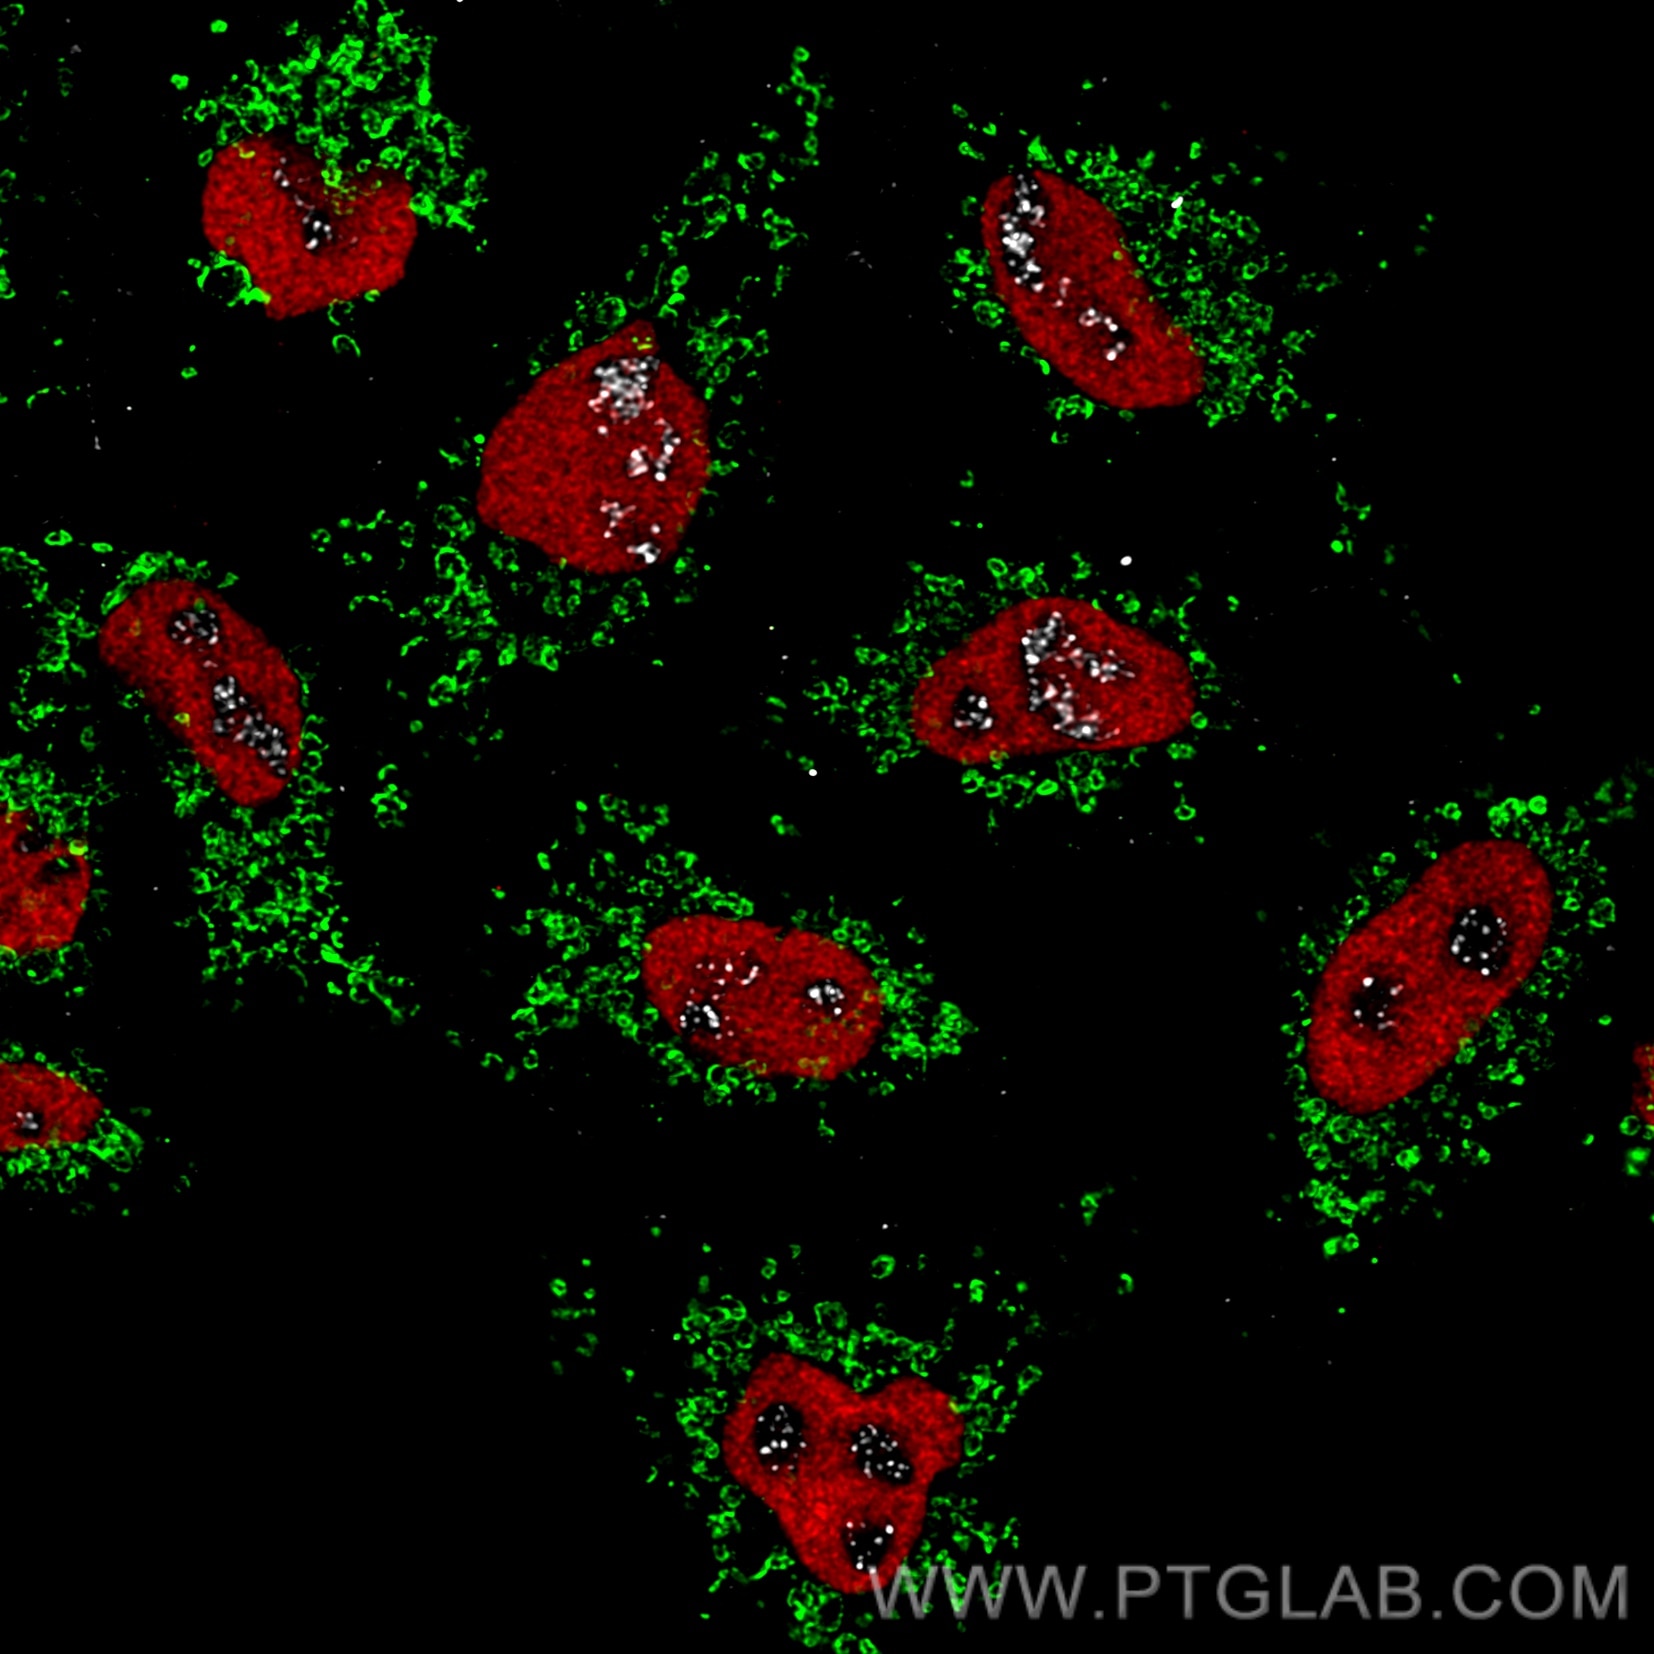 Immunofluorescence of HeLa: PFA-fixed HeLa cells were stained with CoraLite® 488-conjugated Tom20 antibody (CL488-66777, green), anti-HDAC2 (67165-1-Ig) labeled with FlexAble CoraLite® Plus 555 Kit (KFA062, red) and anti- PAF49 antibody labeled with FlexAble ​CoraLite® Plus 647 Kit (KFA063, grey). Confocal images were acquired with a 100x oil objective and post-processed. Images were recorded at the Core Facility Bioimaging at the Biomedical Center, LMU Munich.